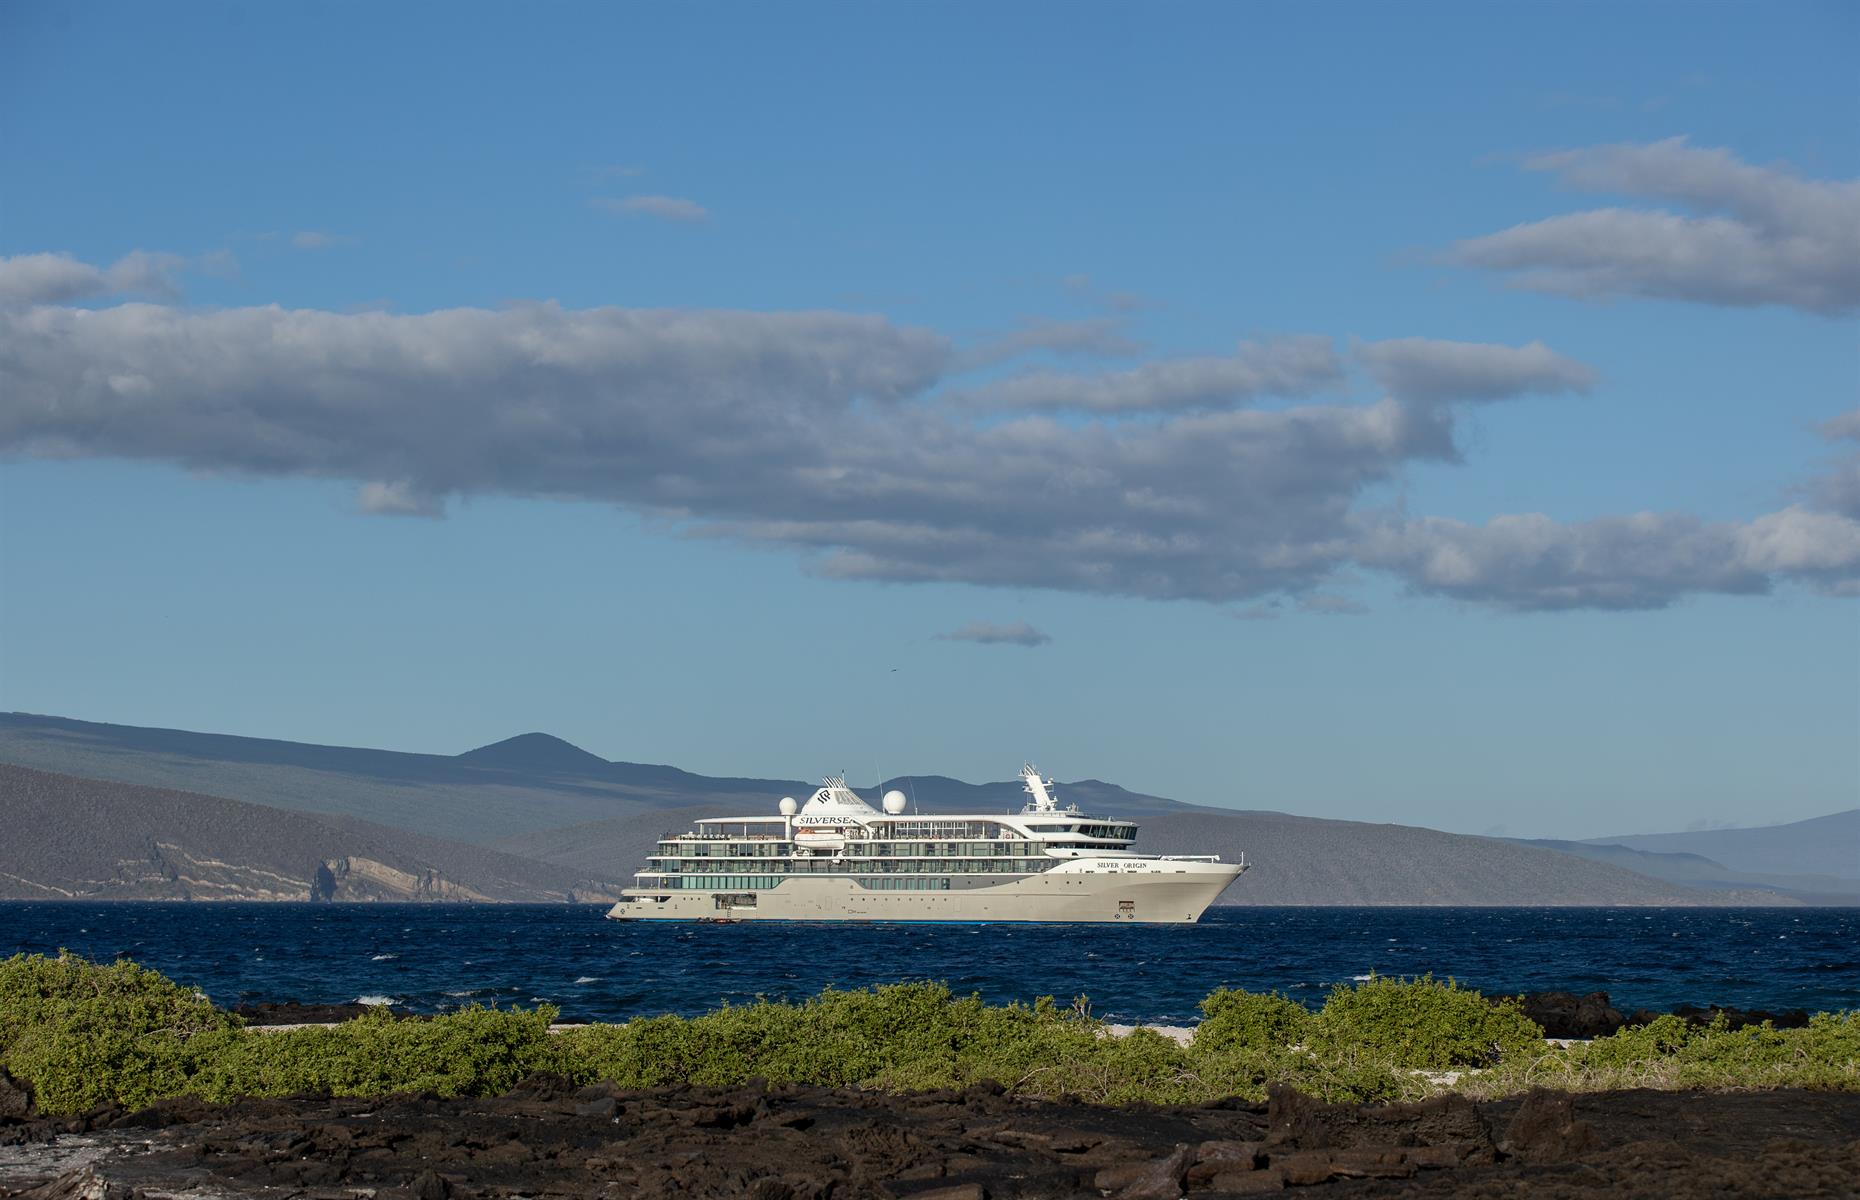 <p>In the Galapagos Islands, the best things really do come in small packages, and many lines have specially designed ships that only sail in this region. Look for custom-built vessels from Celebrity Cruises, Hurtigruten, G Adventures and Metropolitan Touring, or explore these isles in style with luxury line Silversea. Silver Origin takes its name from Darwin's ground-breaking theory, with a seven-day Galapagos Voyage from $8,881, packed with blue-footed boobies, marine iguanas and giant tortoises peeking out amid the lava-formed landscapes. </p>